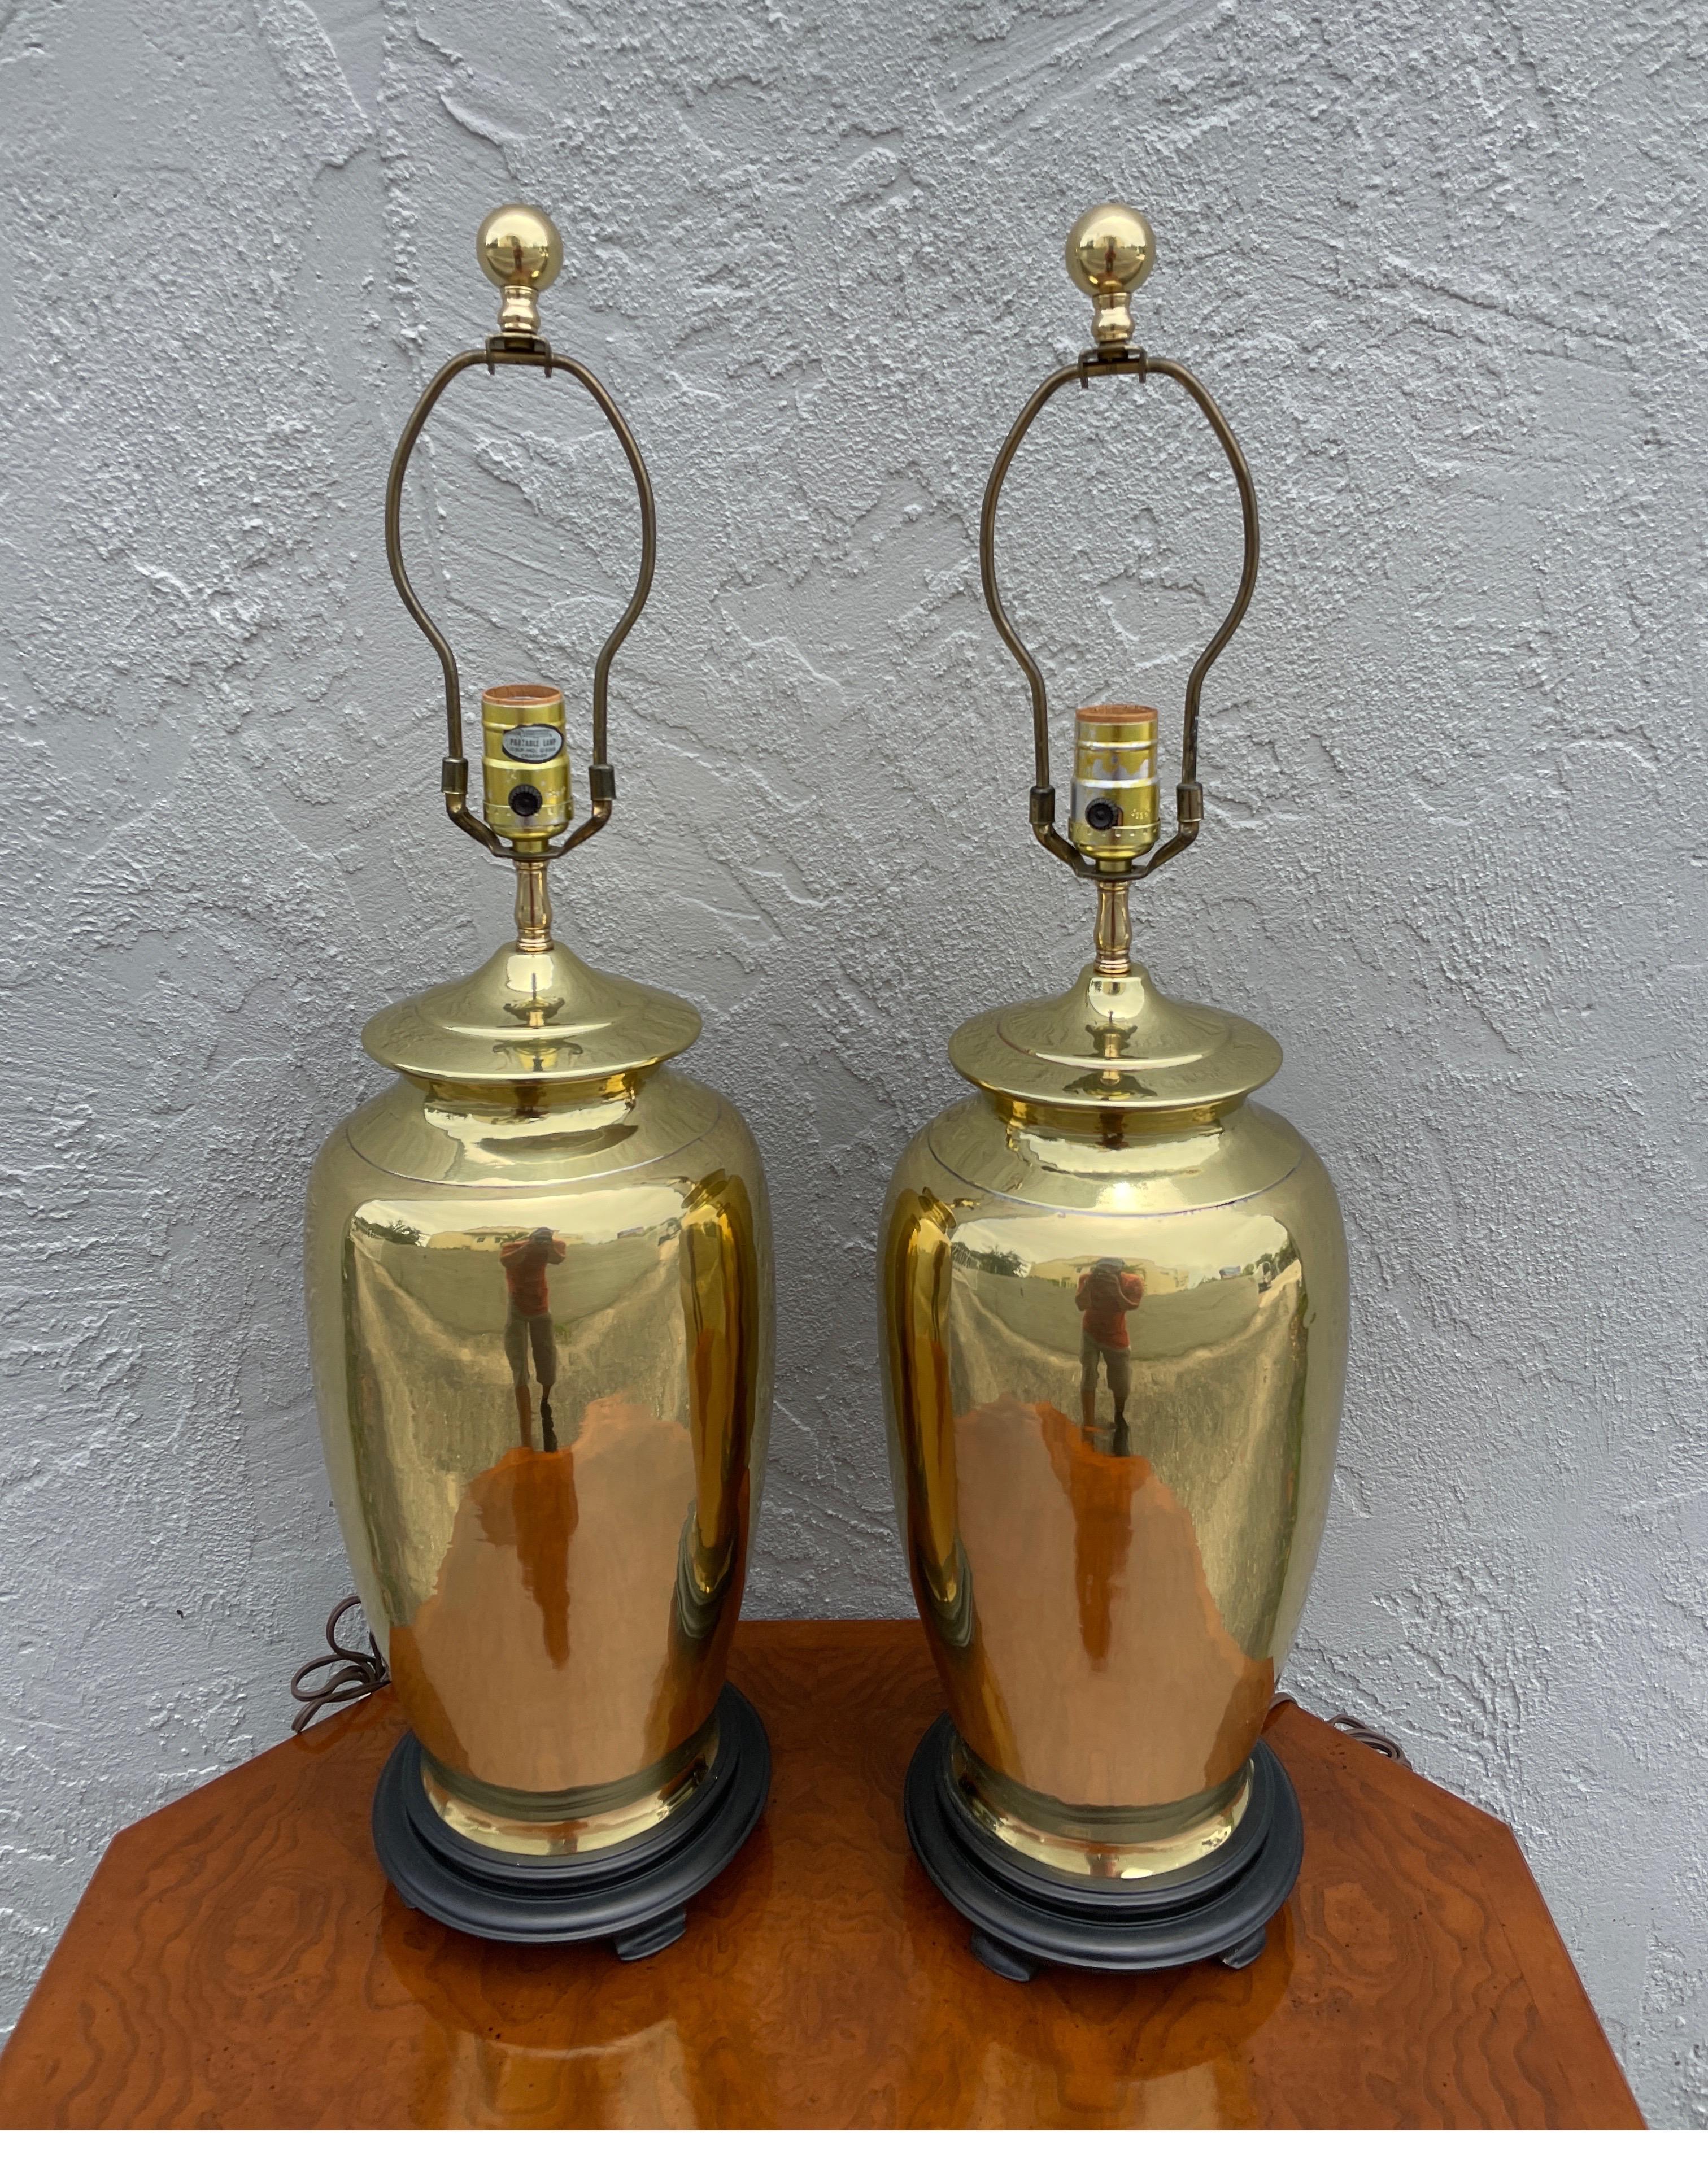 Pair of vintage polished brass ginger jar lamps by Chapman.